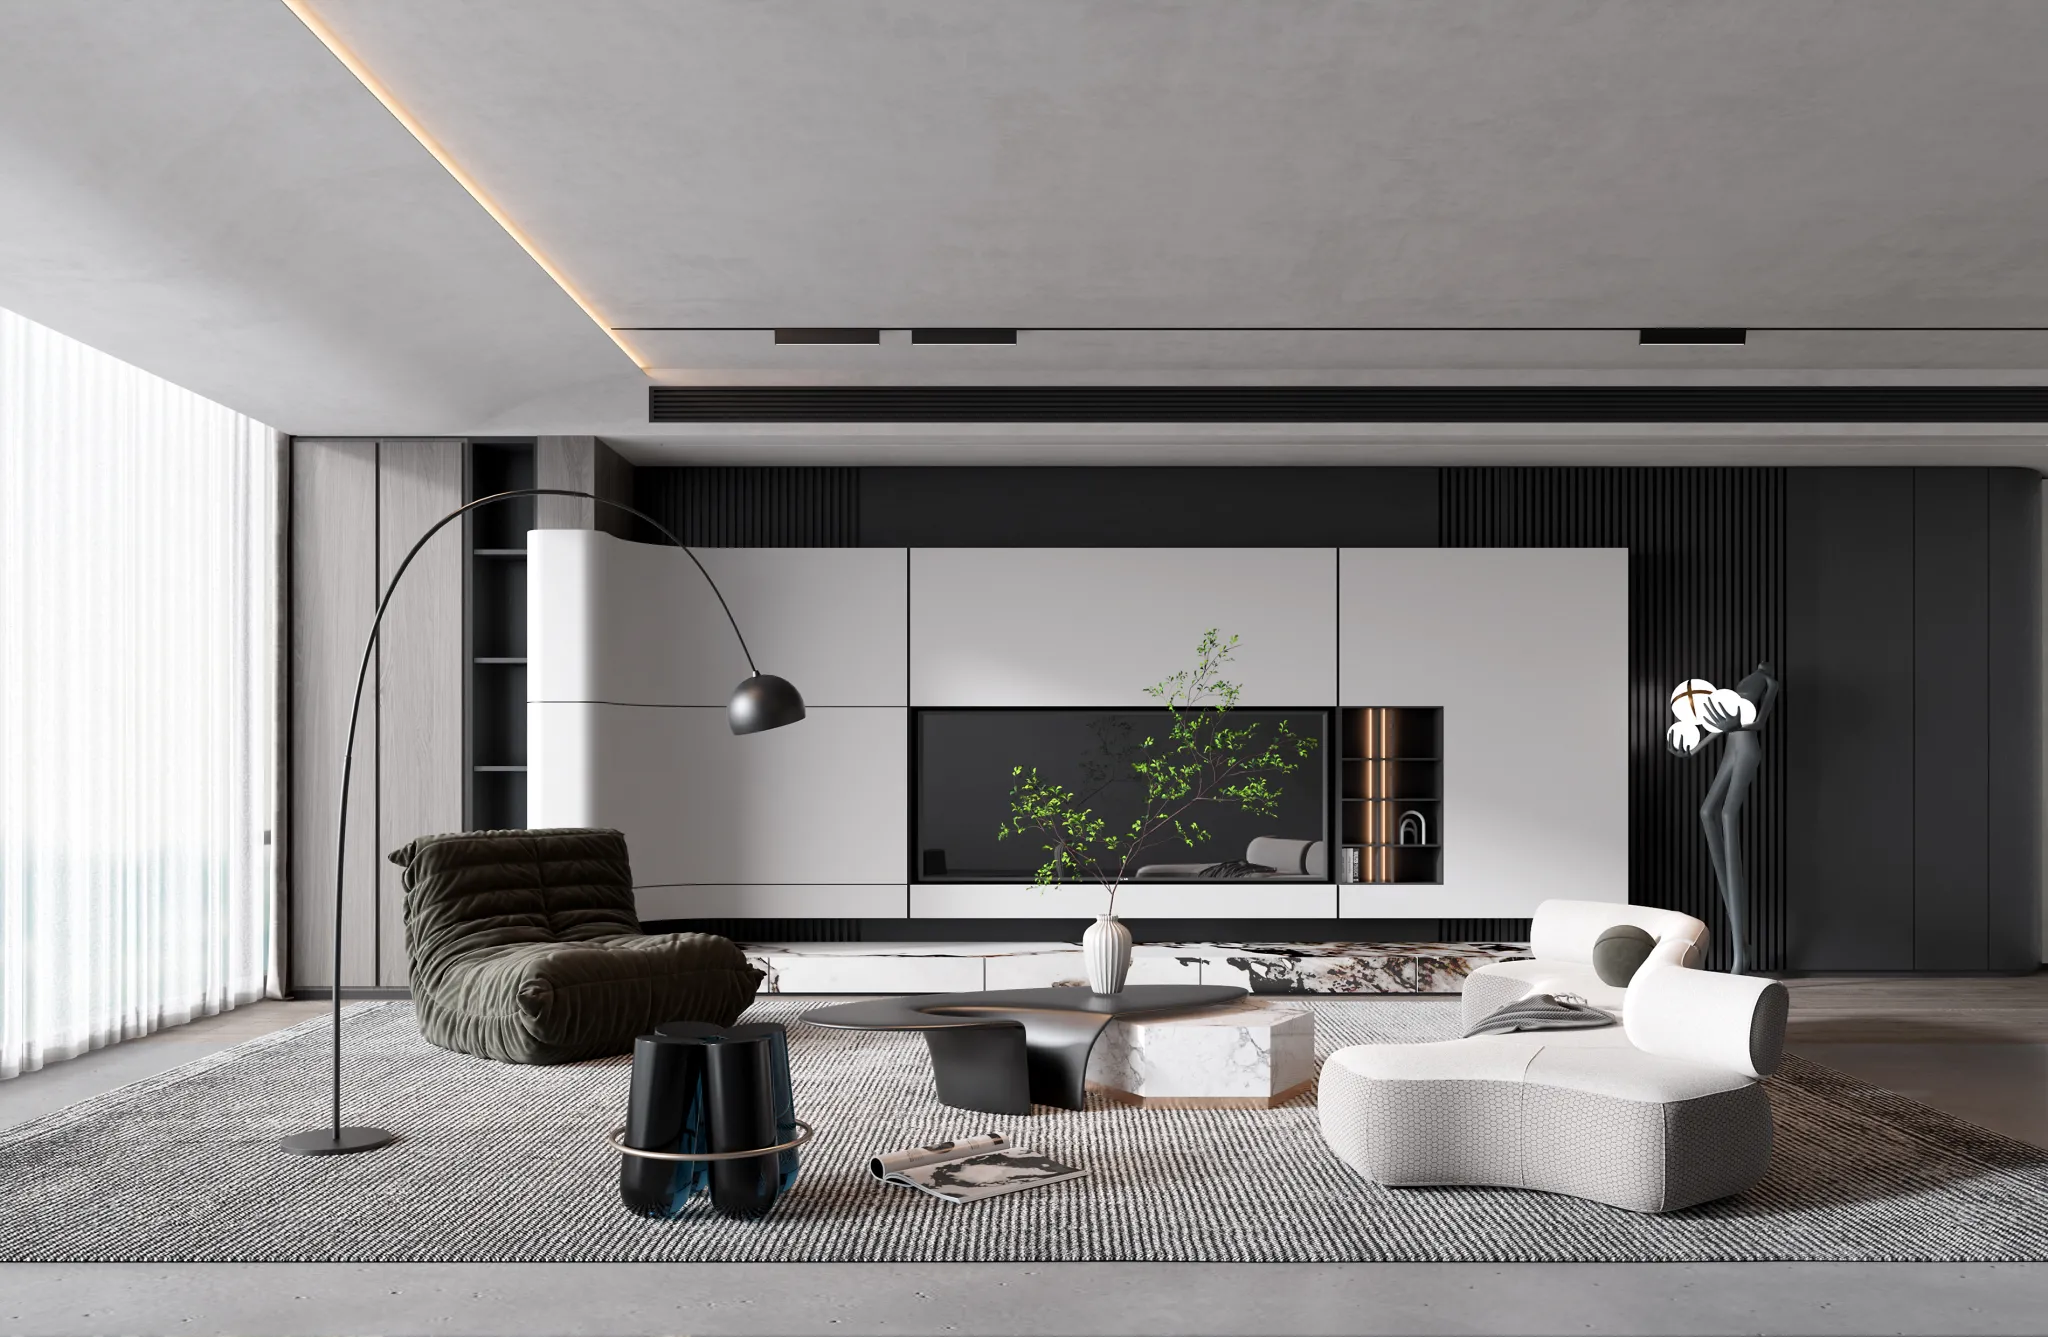 HOUSE SPACE 3D SCENES – LIVING ROOM – 0015